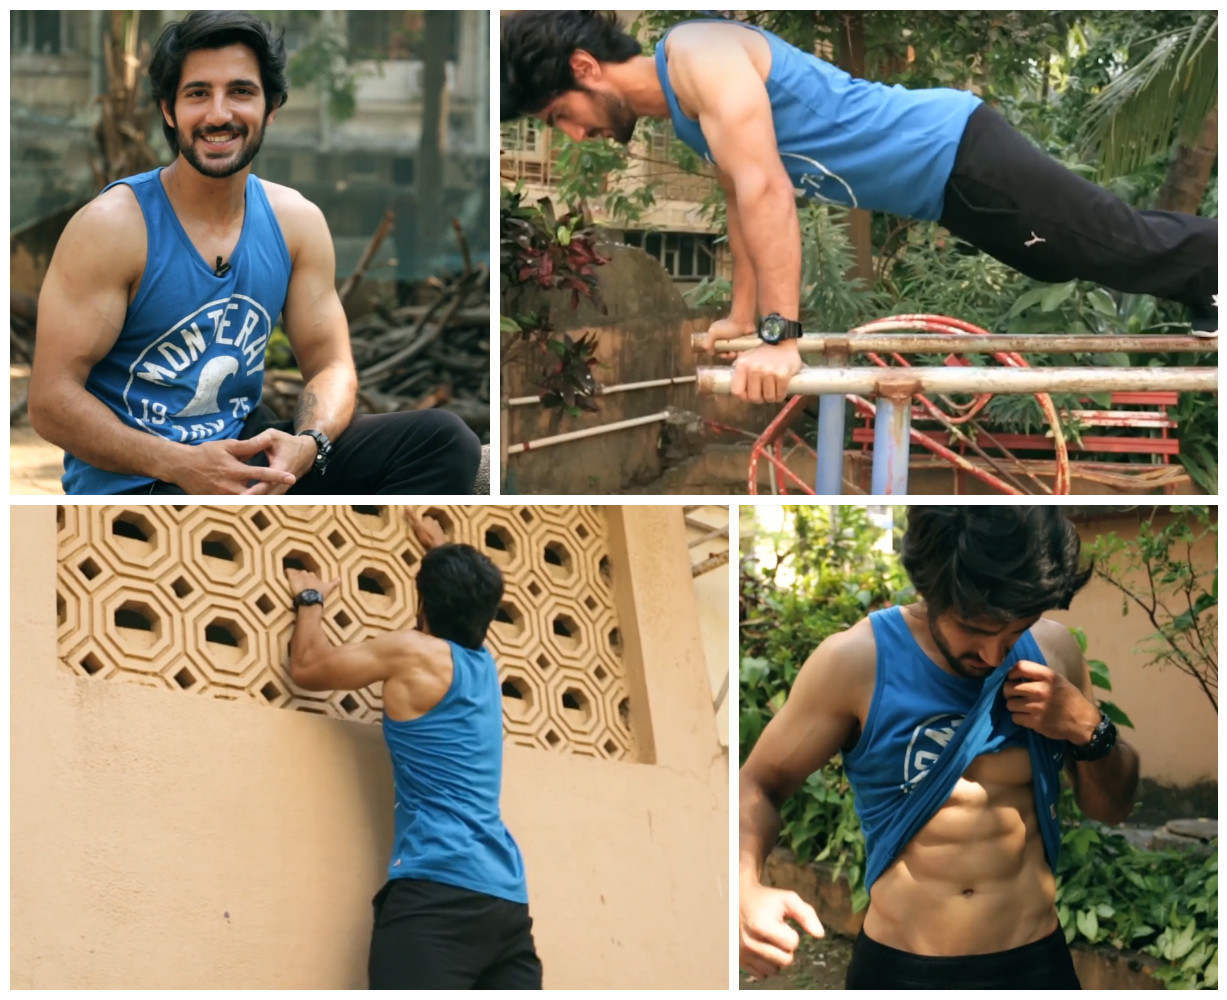 EXCLUSIVE: Tum Bin 2's Aditya Seal advices on how to make a DIY gym!